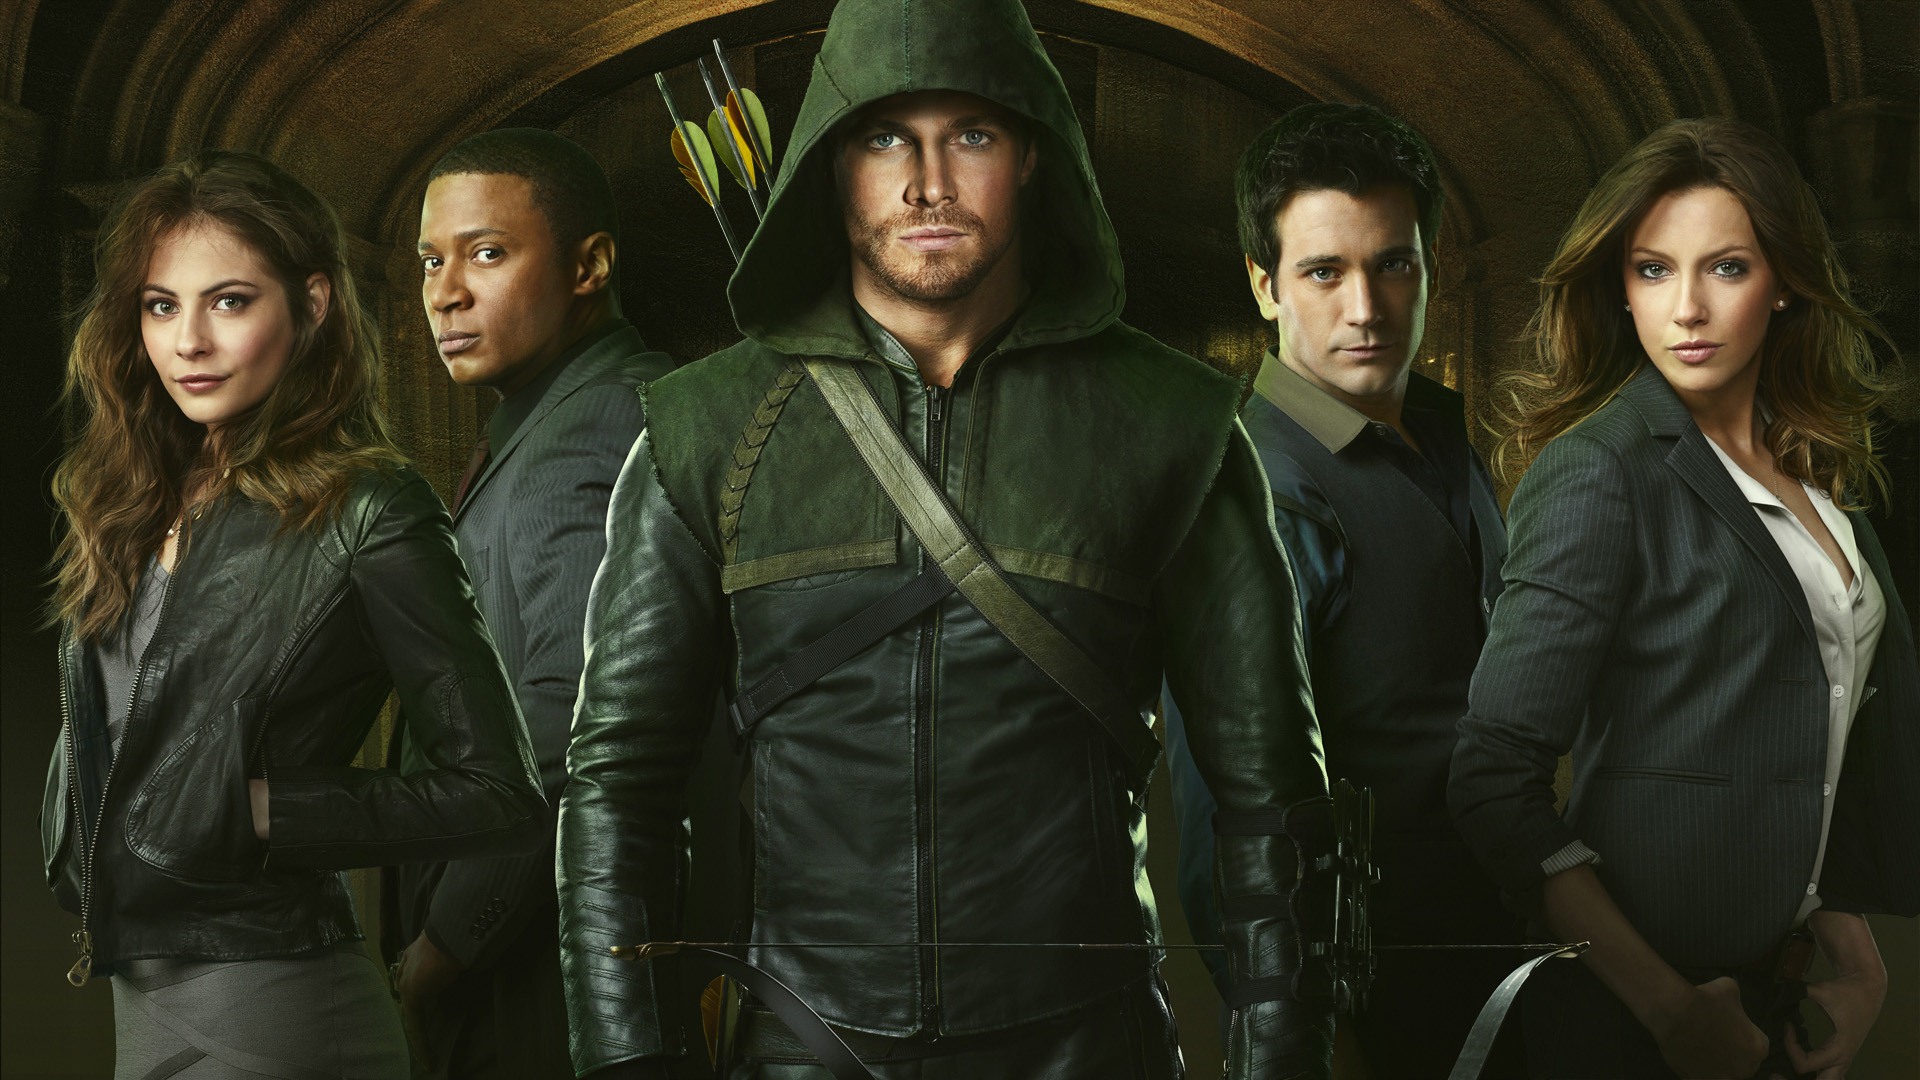 arrow, tv show, colin donnell, david ramsey, green arrow, john diggle, katie cassidy, laurel lance, oliver queen, stephen amell, the hood, thea queen, tommy merlyn, willa holland